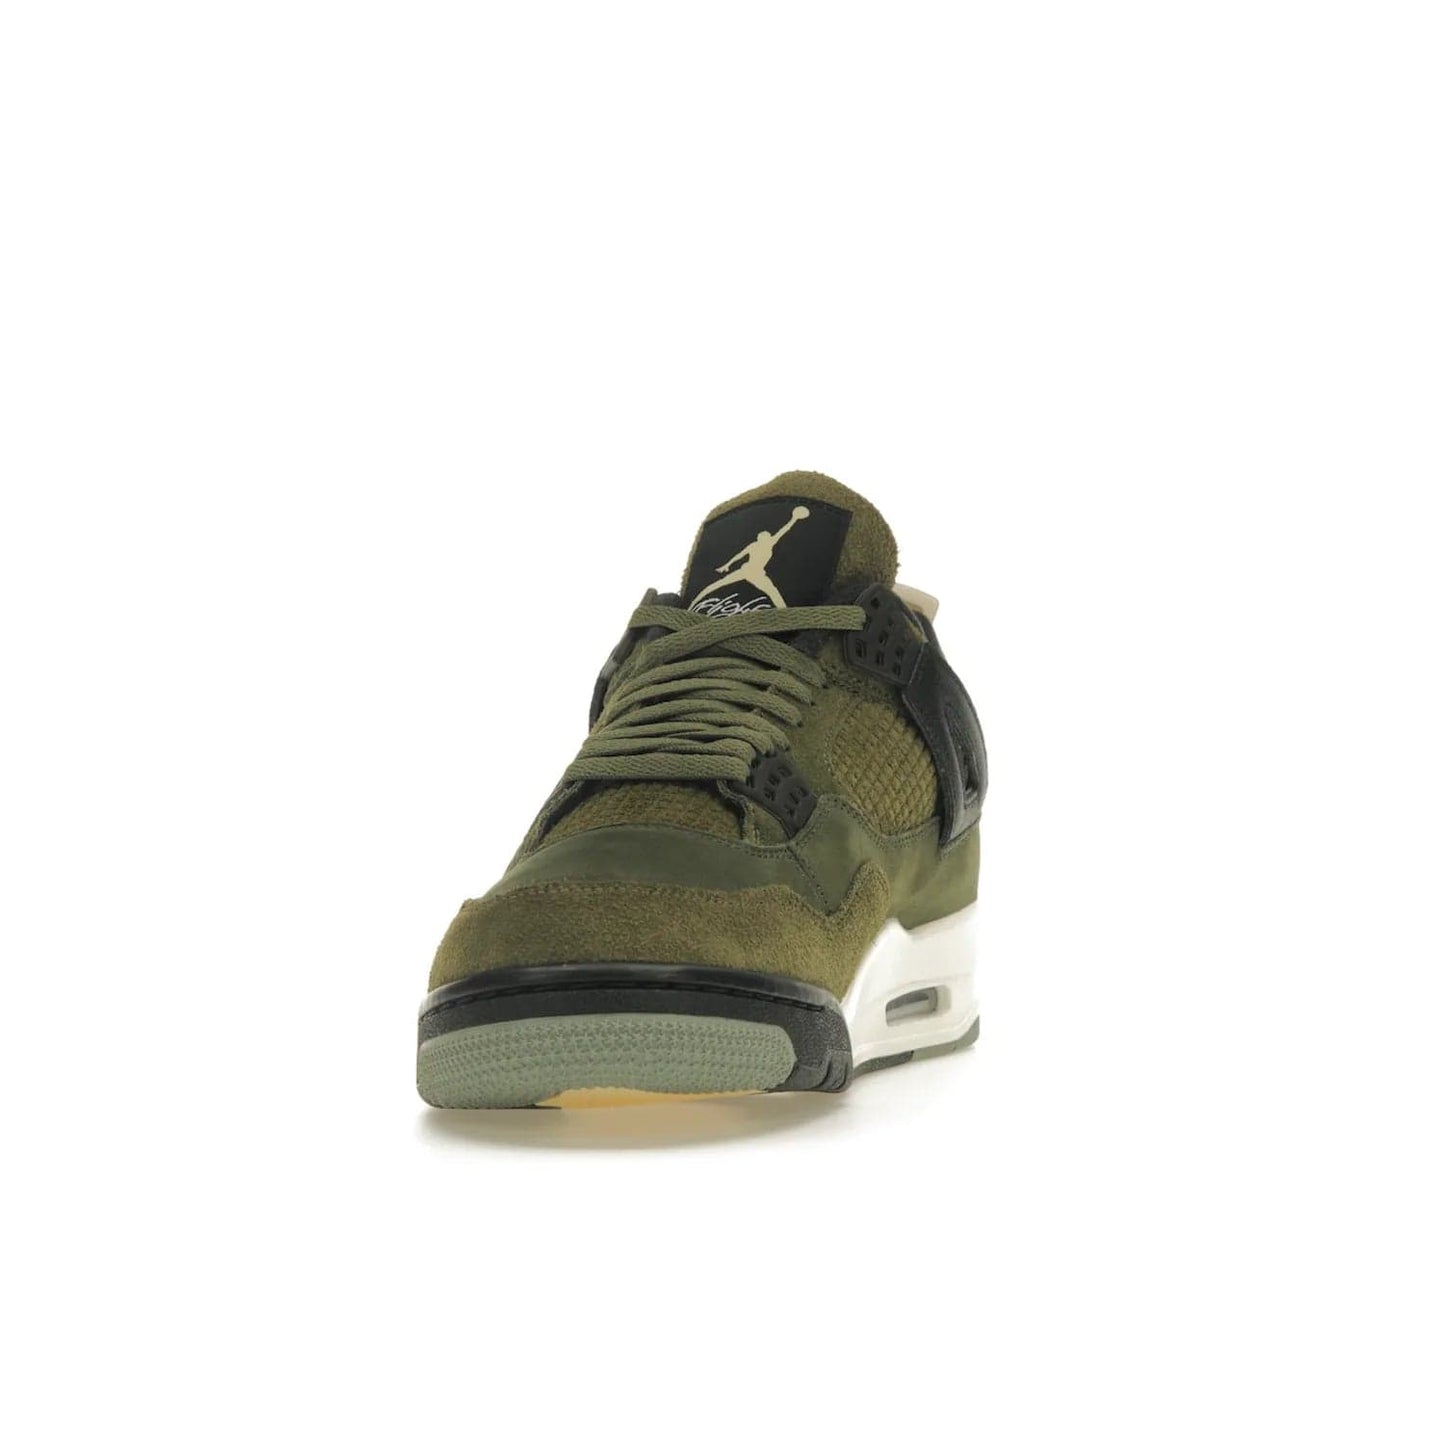 Jordan 4 Retro SE Craft Medium Olive - Image 12 - Only at www.BallersClubKickz.com - Grab the Jordan 4 Retro SE Crafts for a unique style. Combines Medium Olive, Pale Vanilla, Khaki, Black and Sail, with same classic shape, cushioning, and rubber outsole. Available on November 18th!